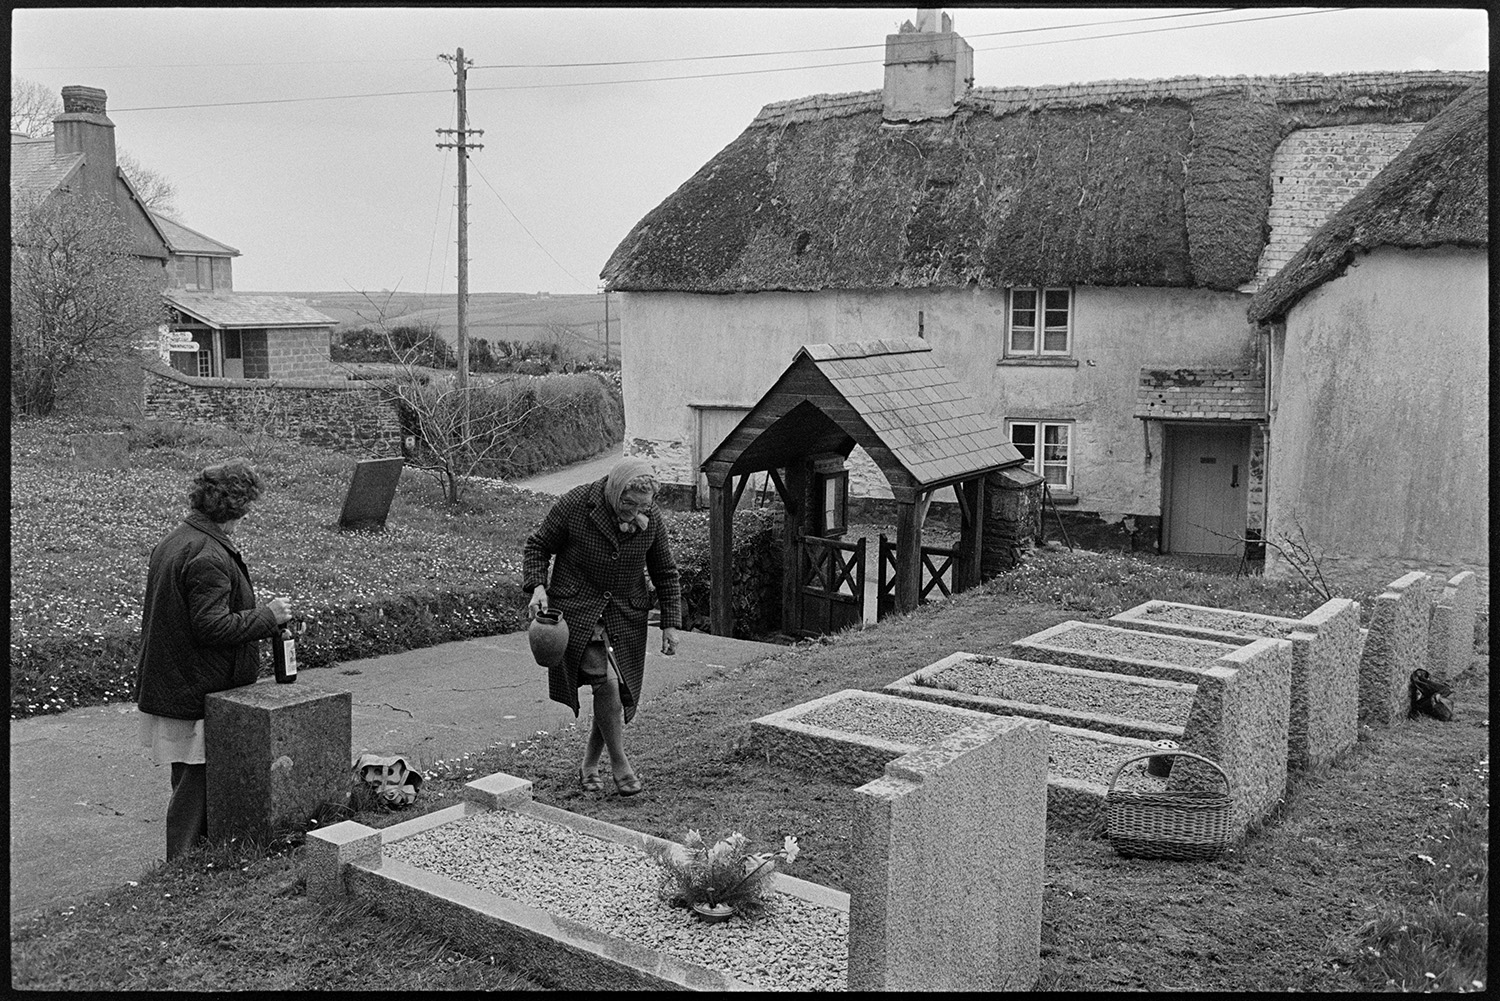 Two women tending graves with thatched farmhouse behind. 
[Two women in Roborough Churchyard. Mrs Wood is using a jug to water flowers on the graves. The lych gate entrance to the churchyard is visible. A thatched farmhouse can be seen in the background.]